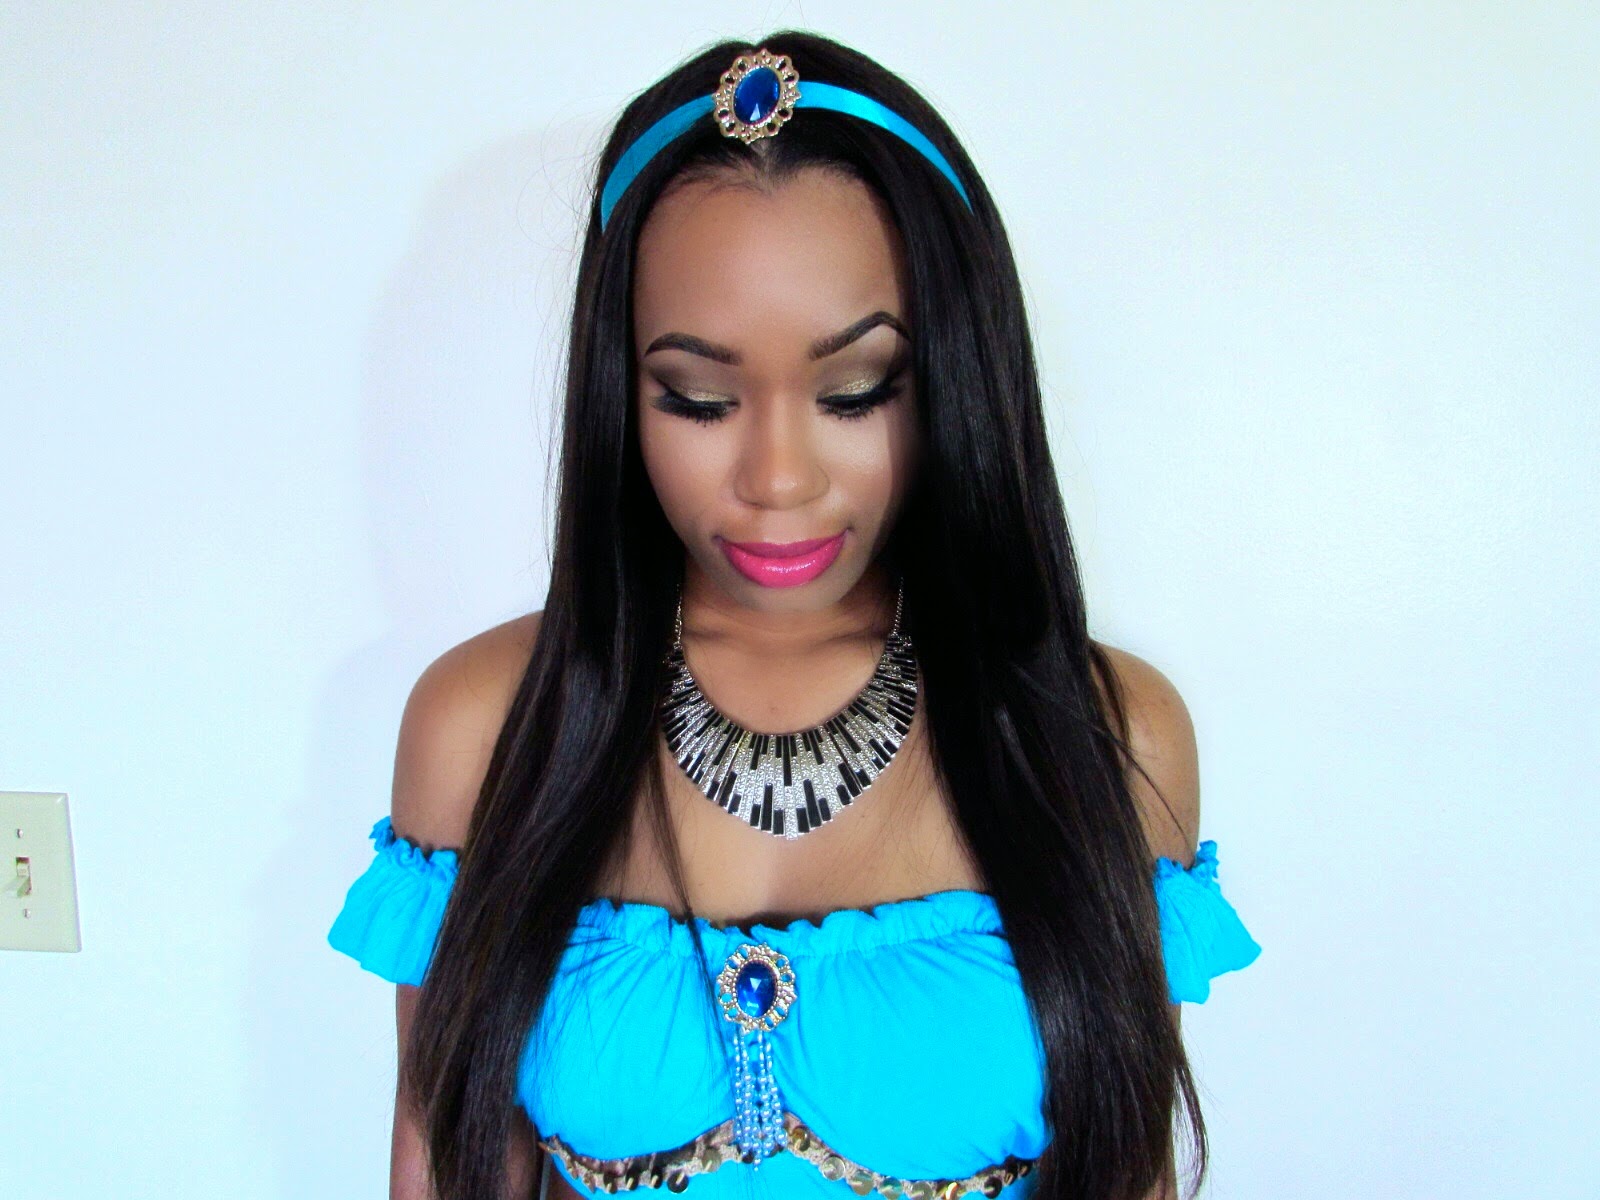 Beauty By Genecia Princess Jasmine Halloween Tutorial Hair Makeup And Costume Completed Look